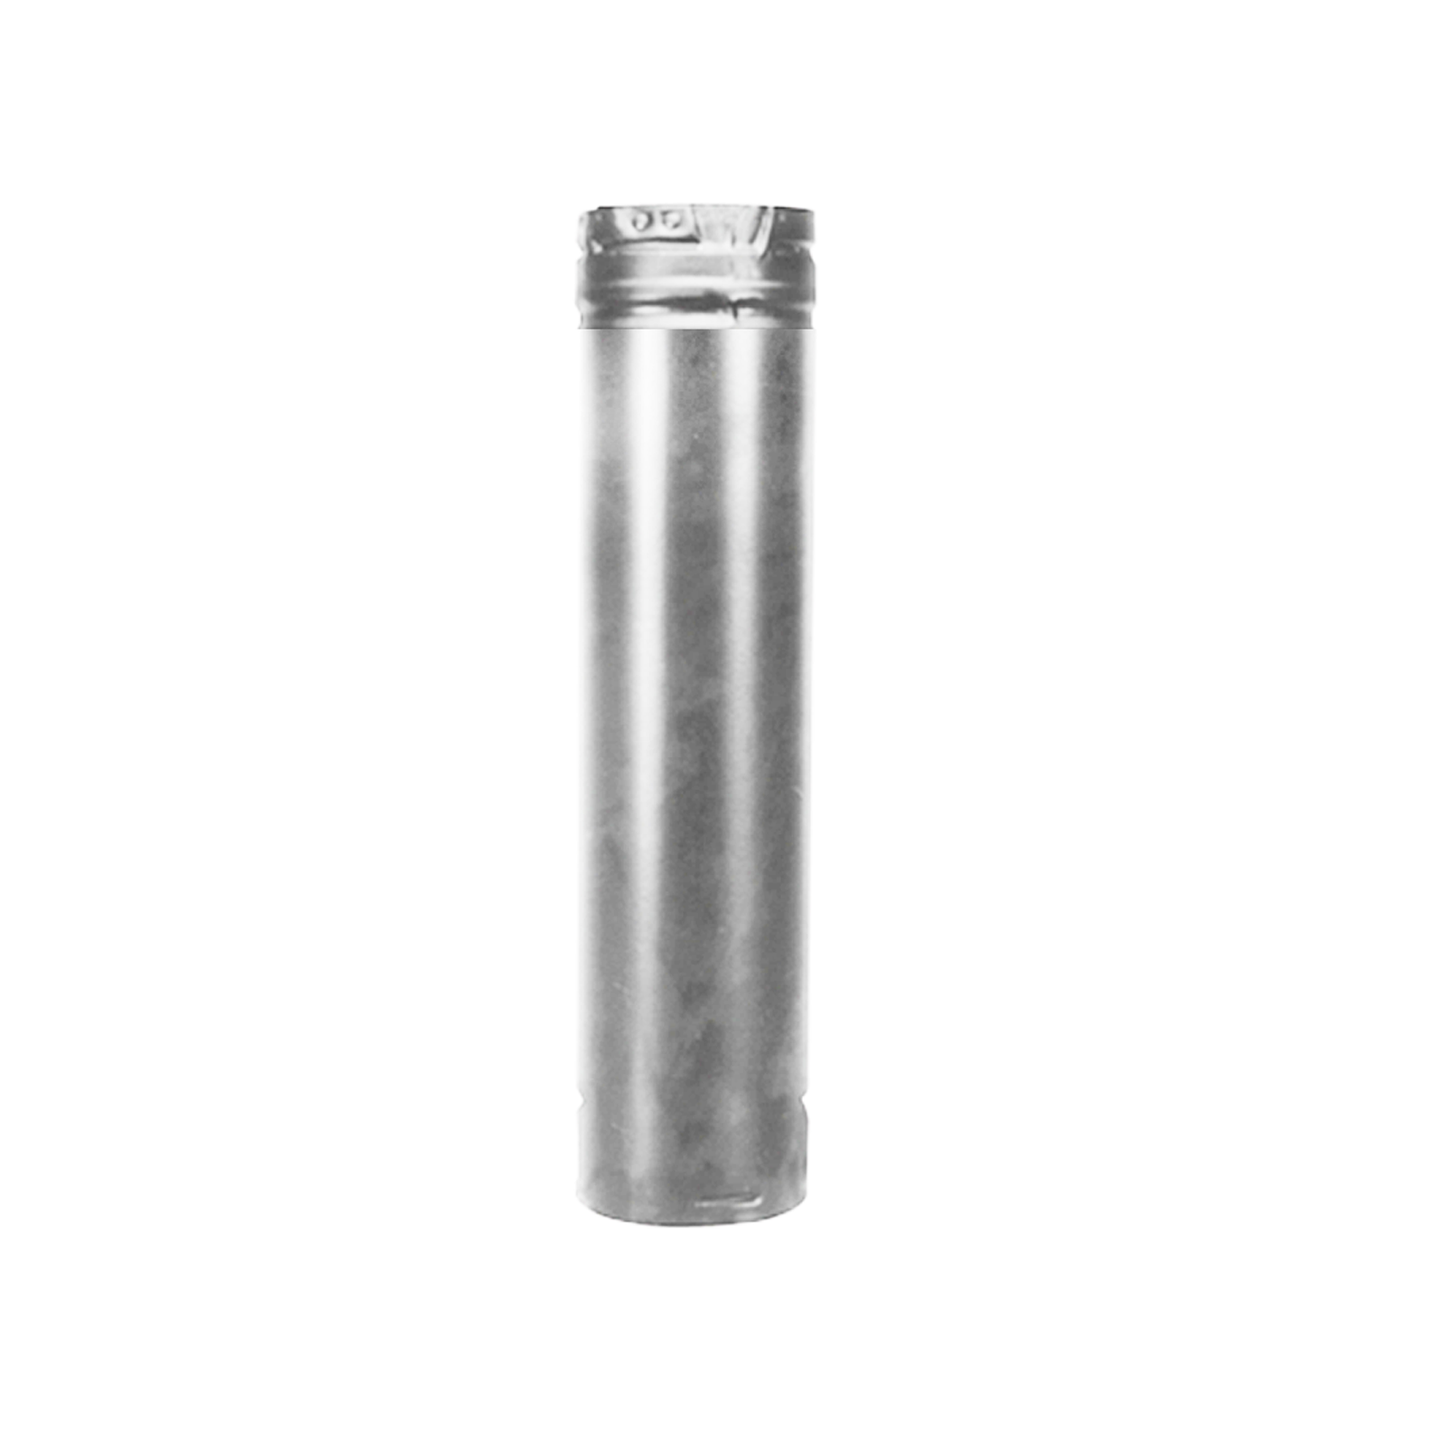 DuraVent Pellet Vent Pro 24" Straight Length Pipe (SS) | 3PVP-24SS